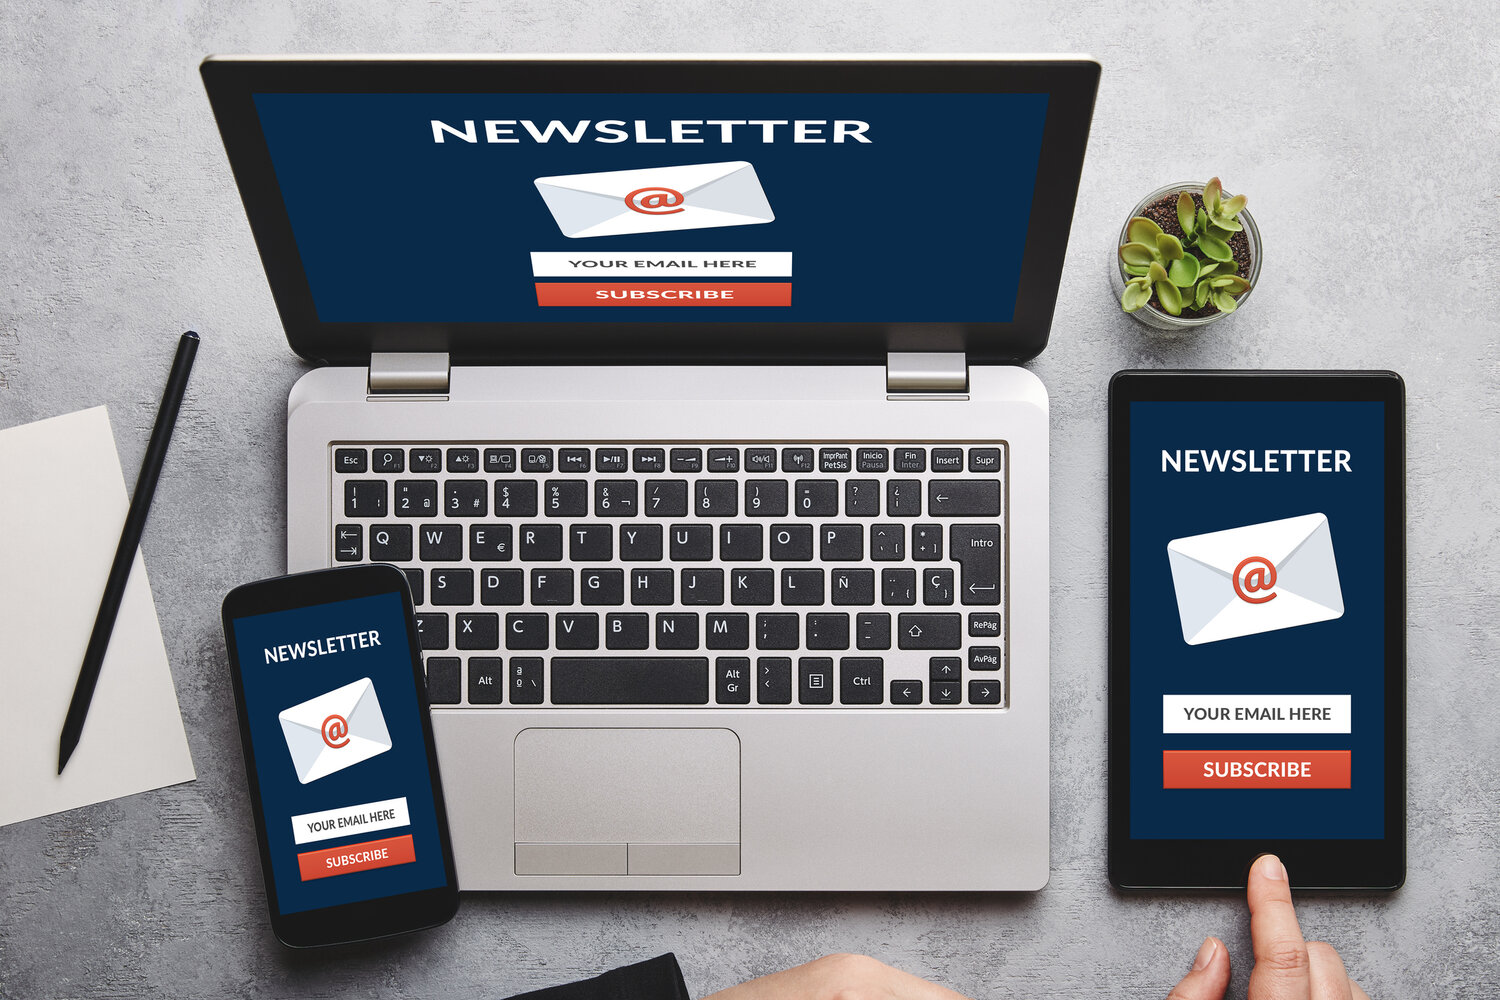 Benefits of Switching to a Newsletter for Your Business